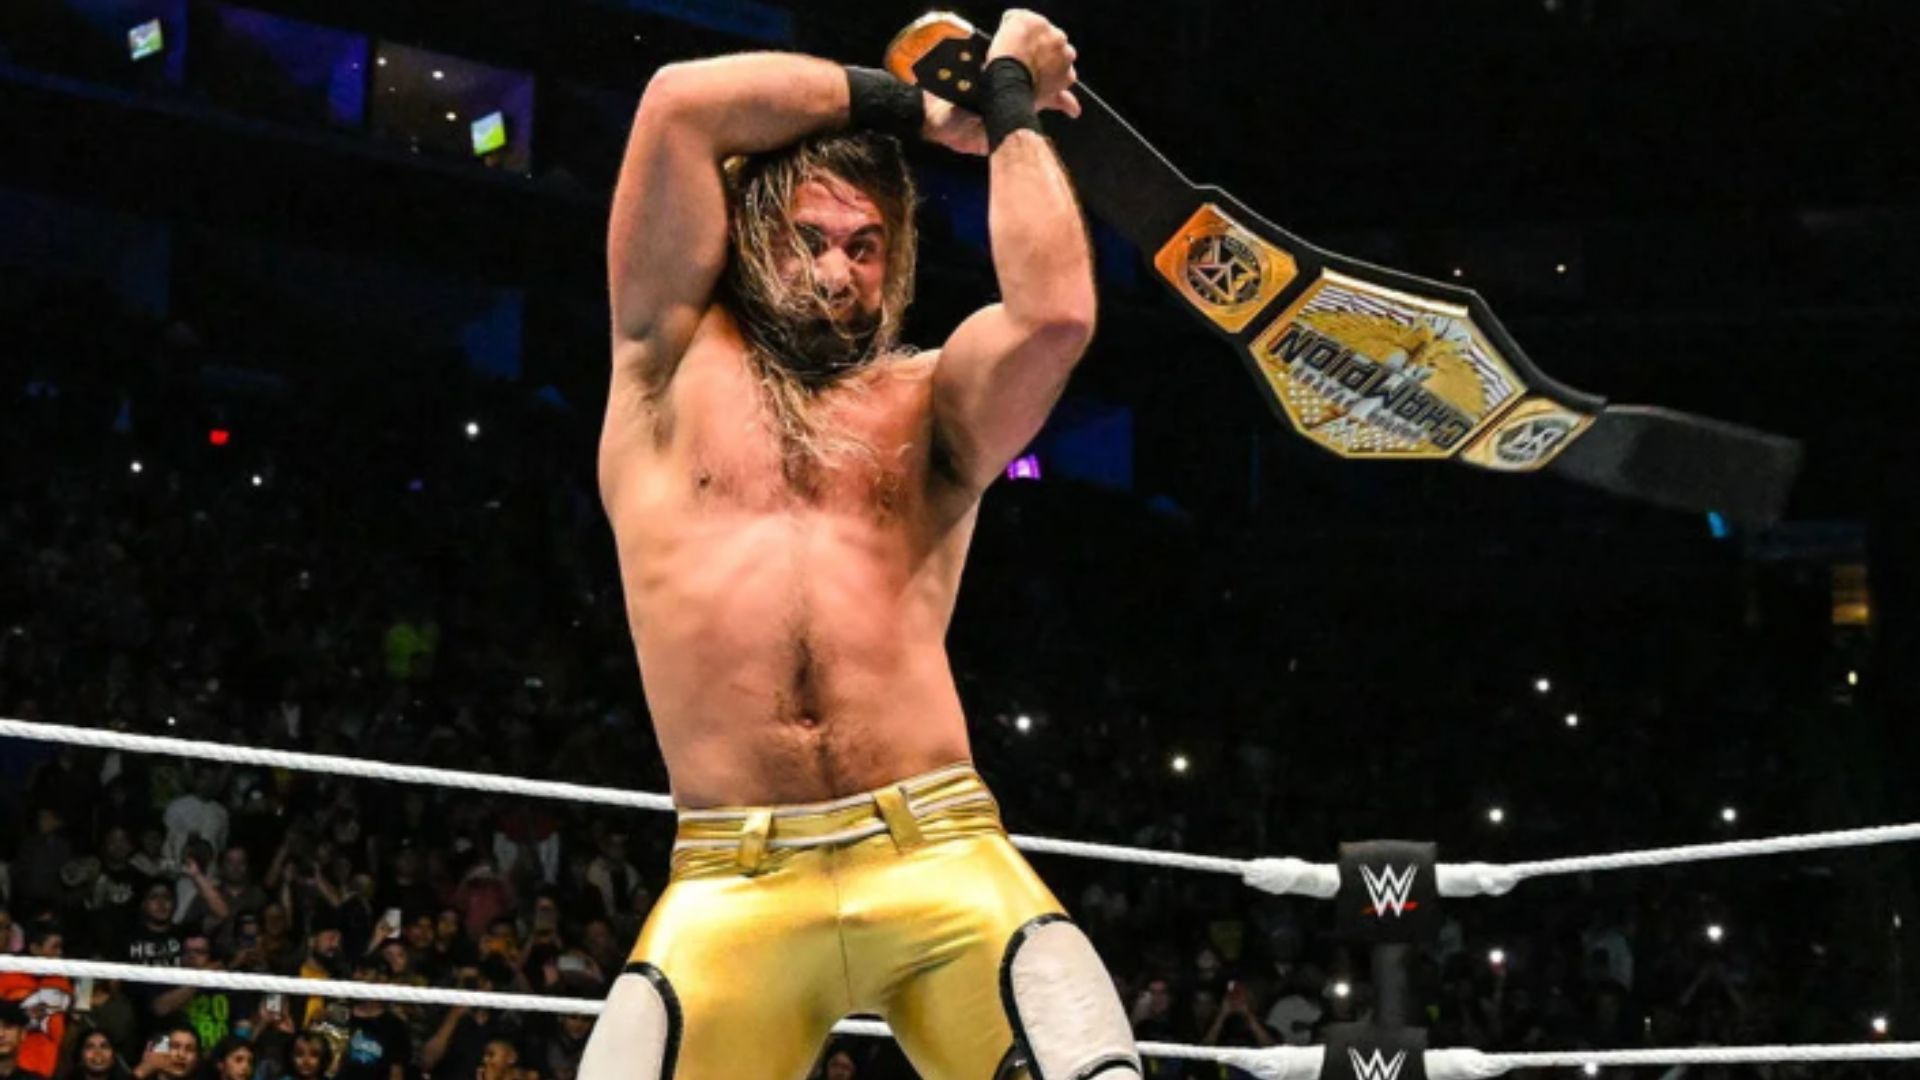 Seth Rollins celebrates after retaining the United States Championship at a WWE live event.